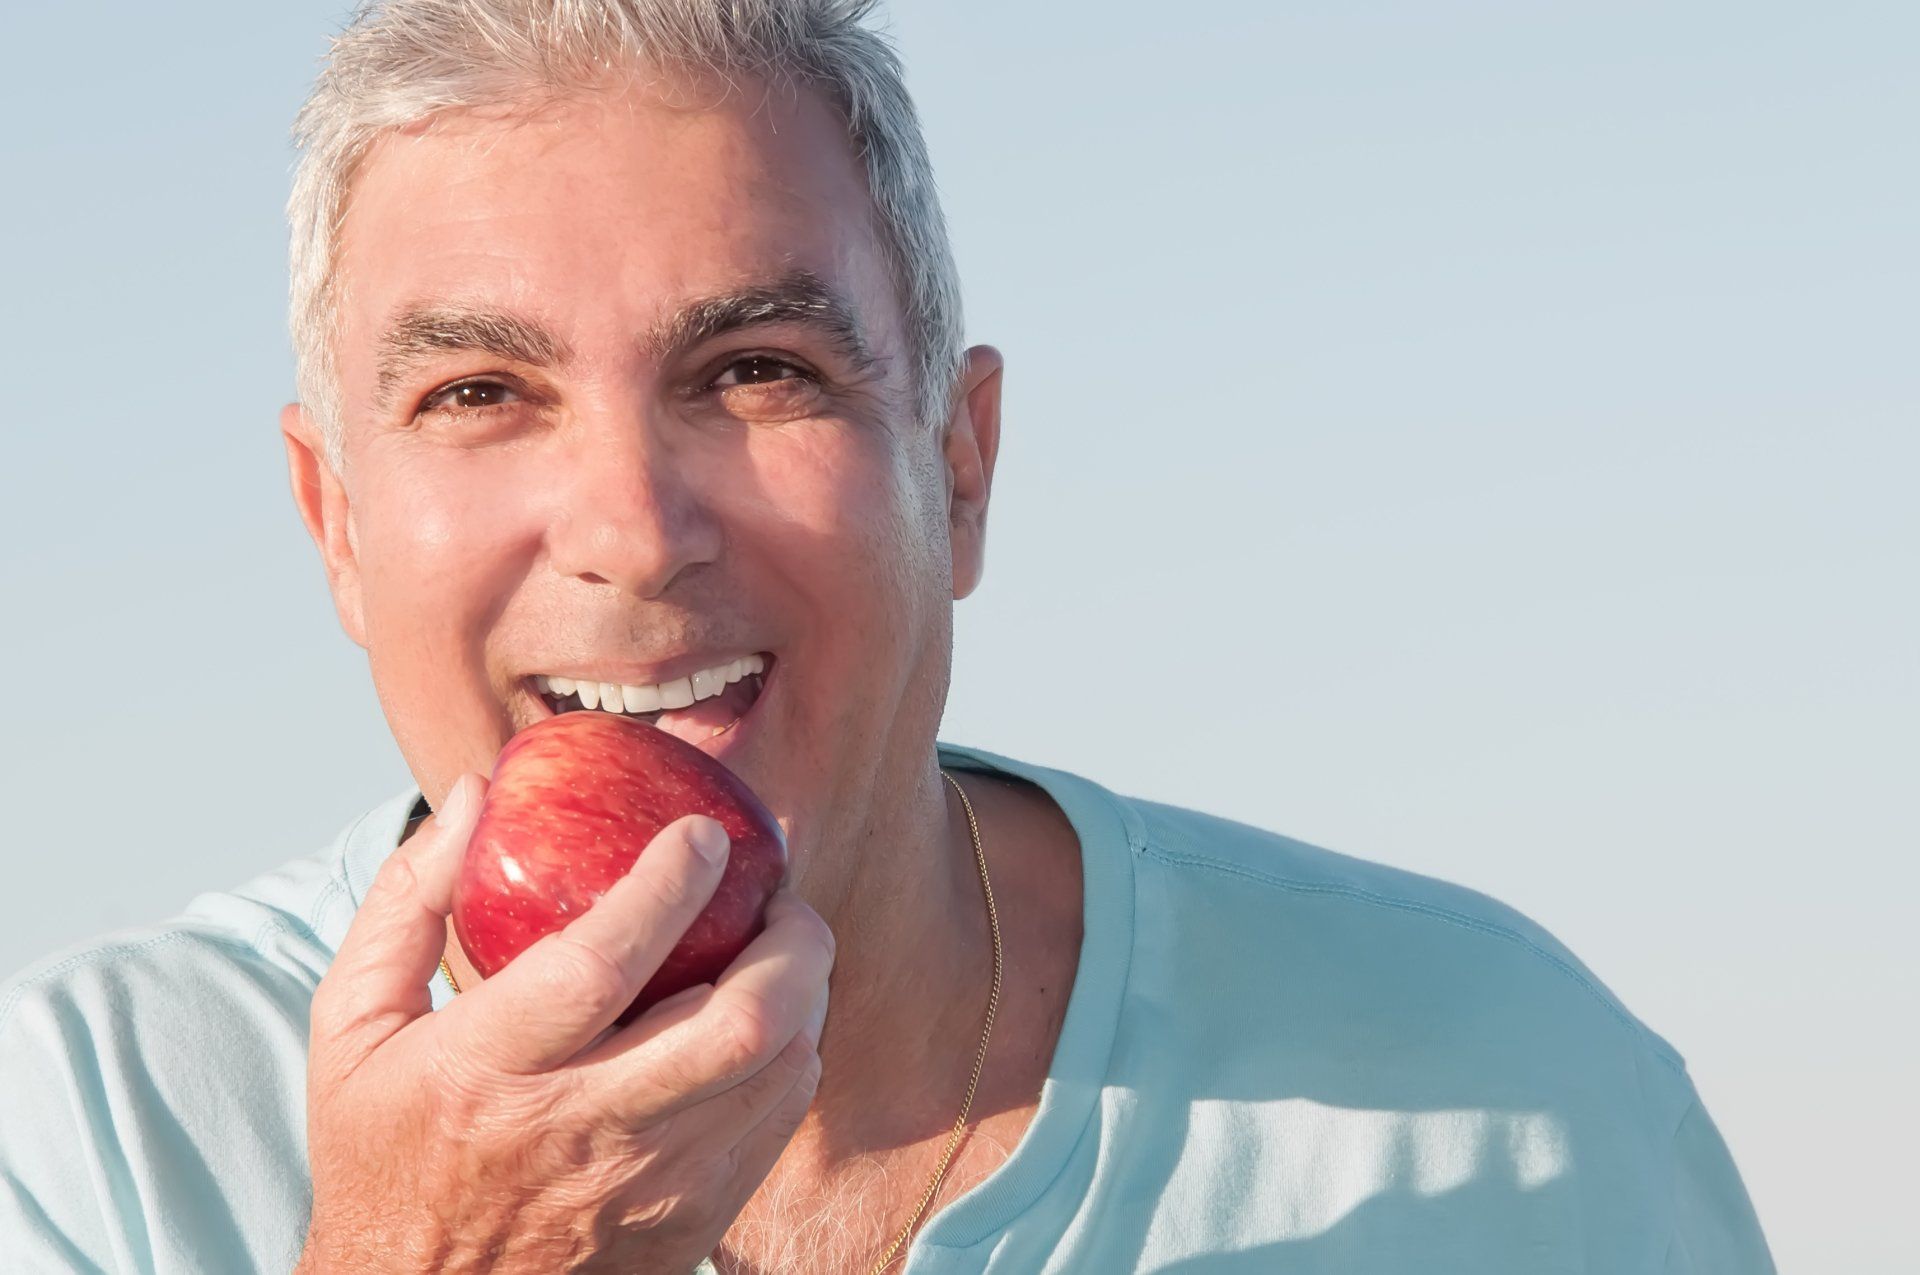 Prosthodontics - a man is smiling while eating an apple .